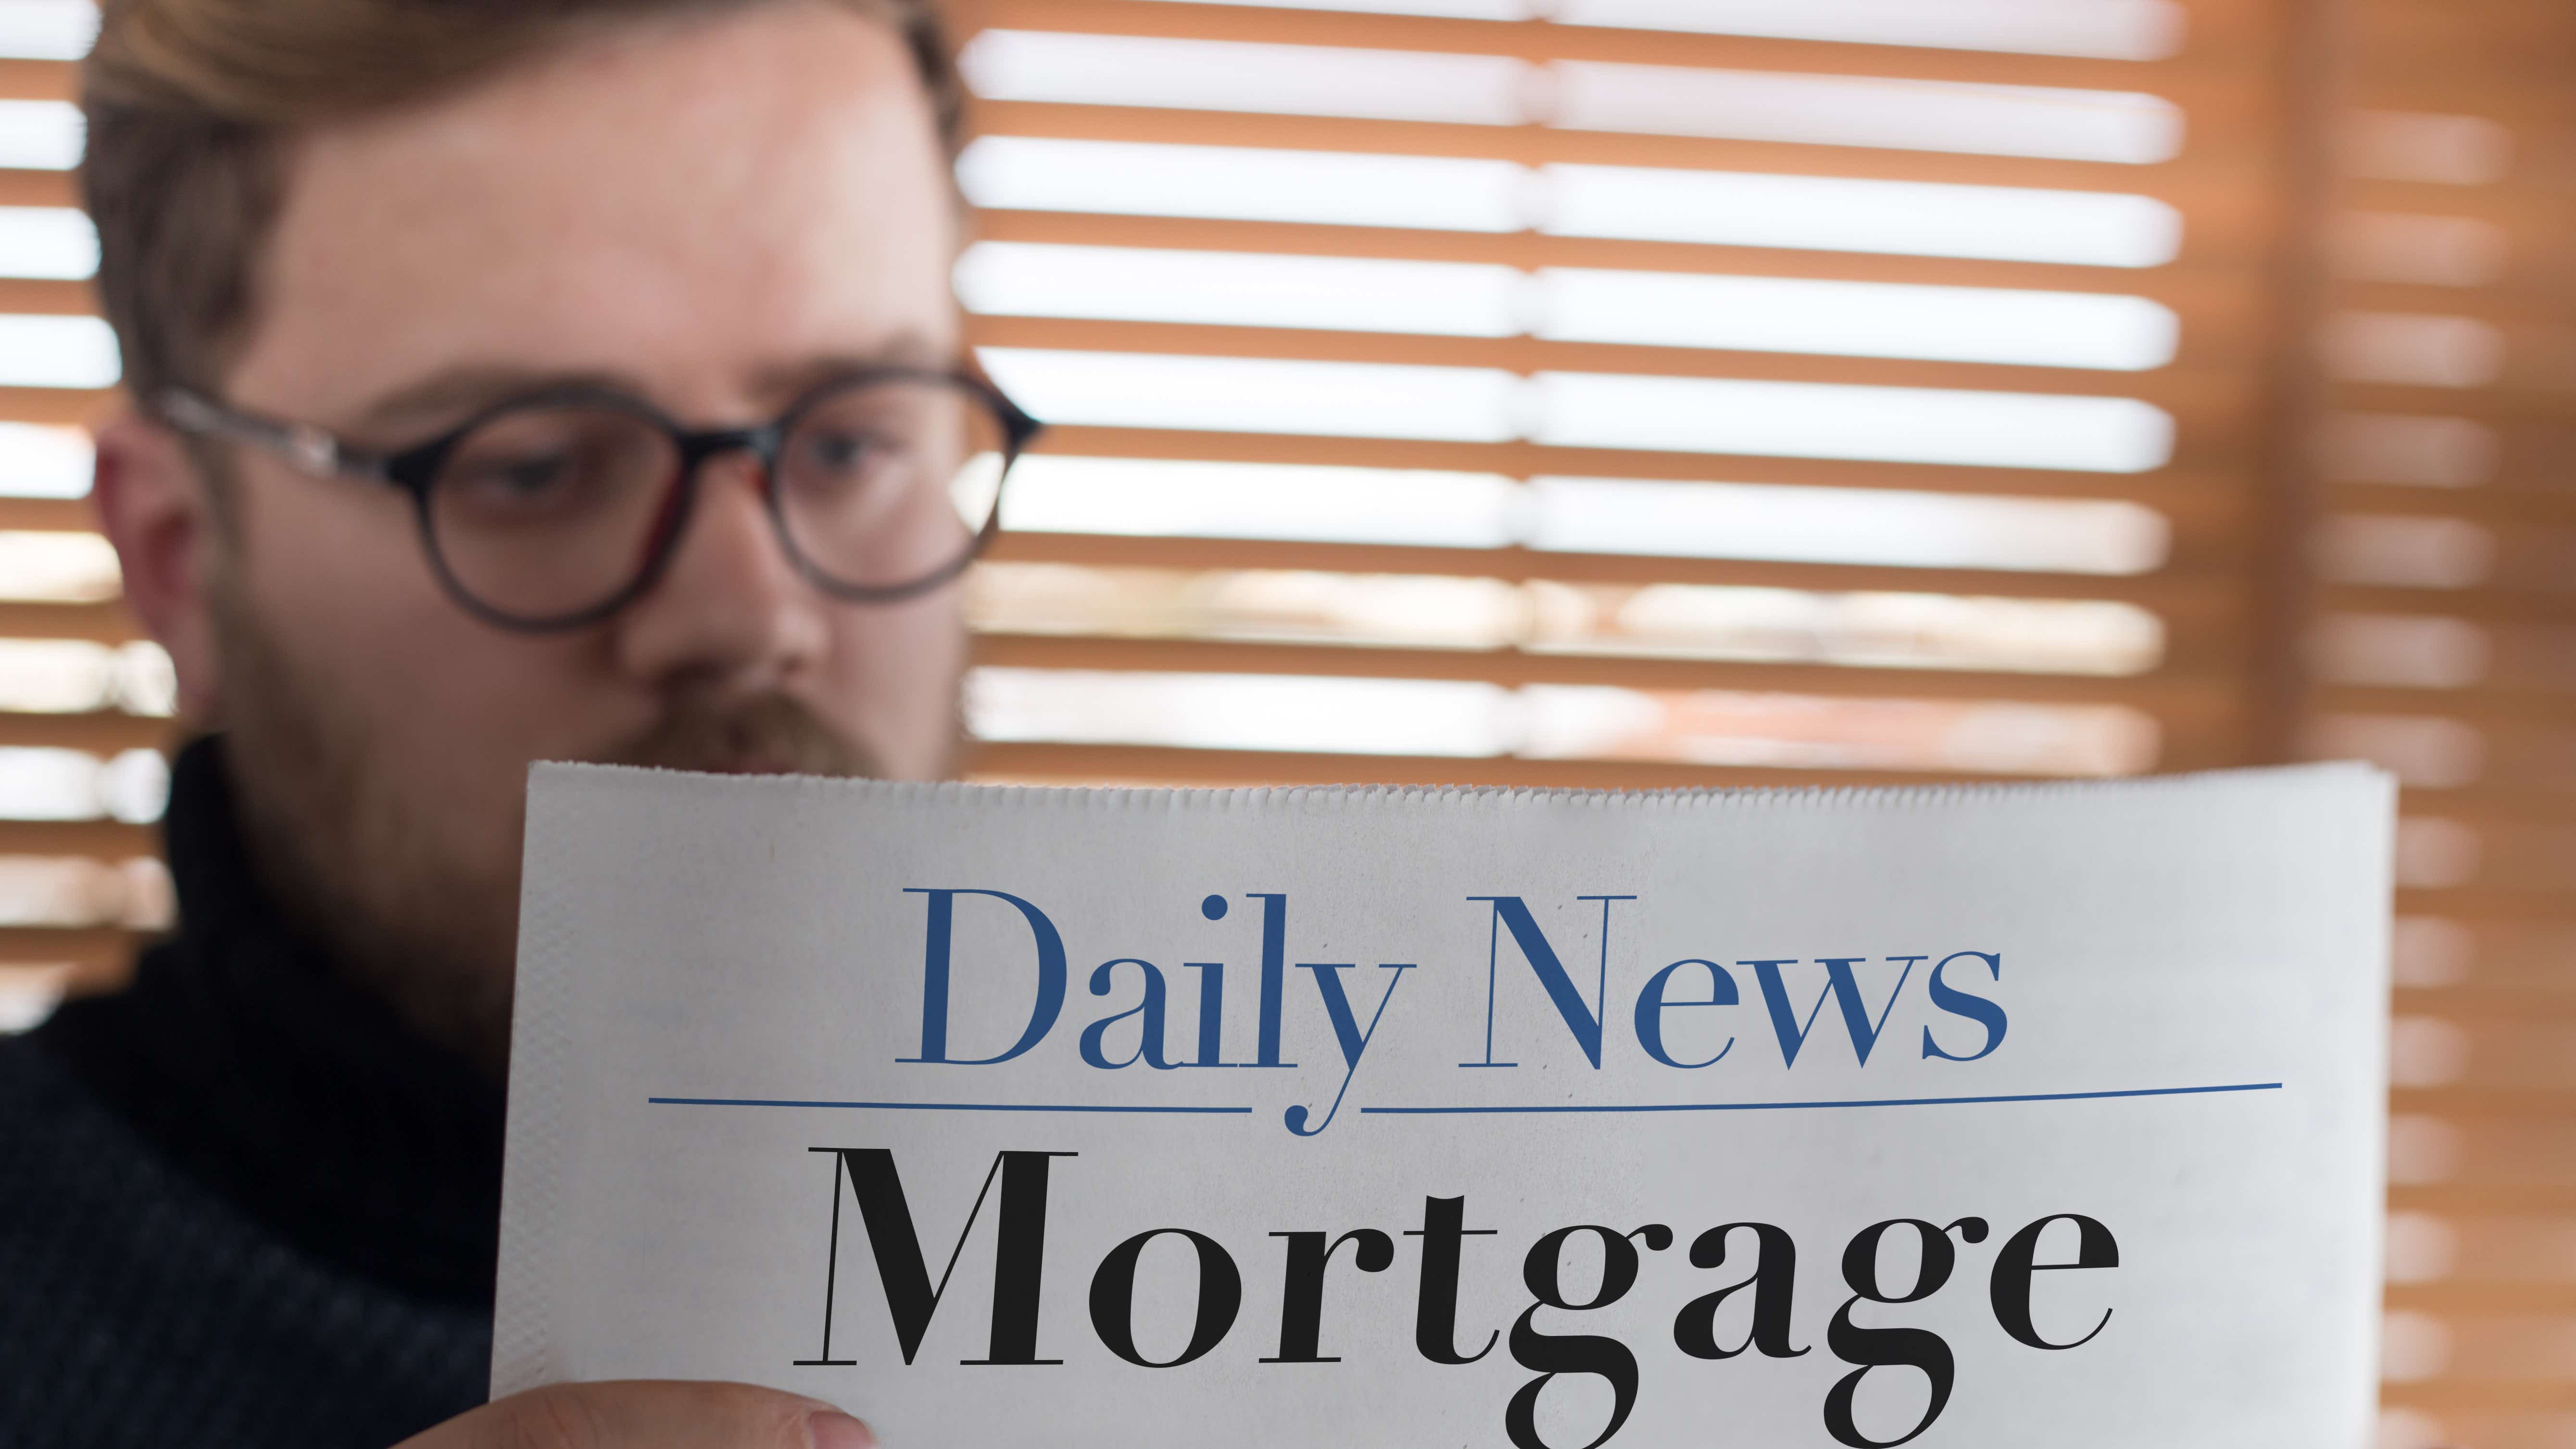 A close up of someone reading a newspaper titled 'daily news - mortgages'